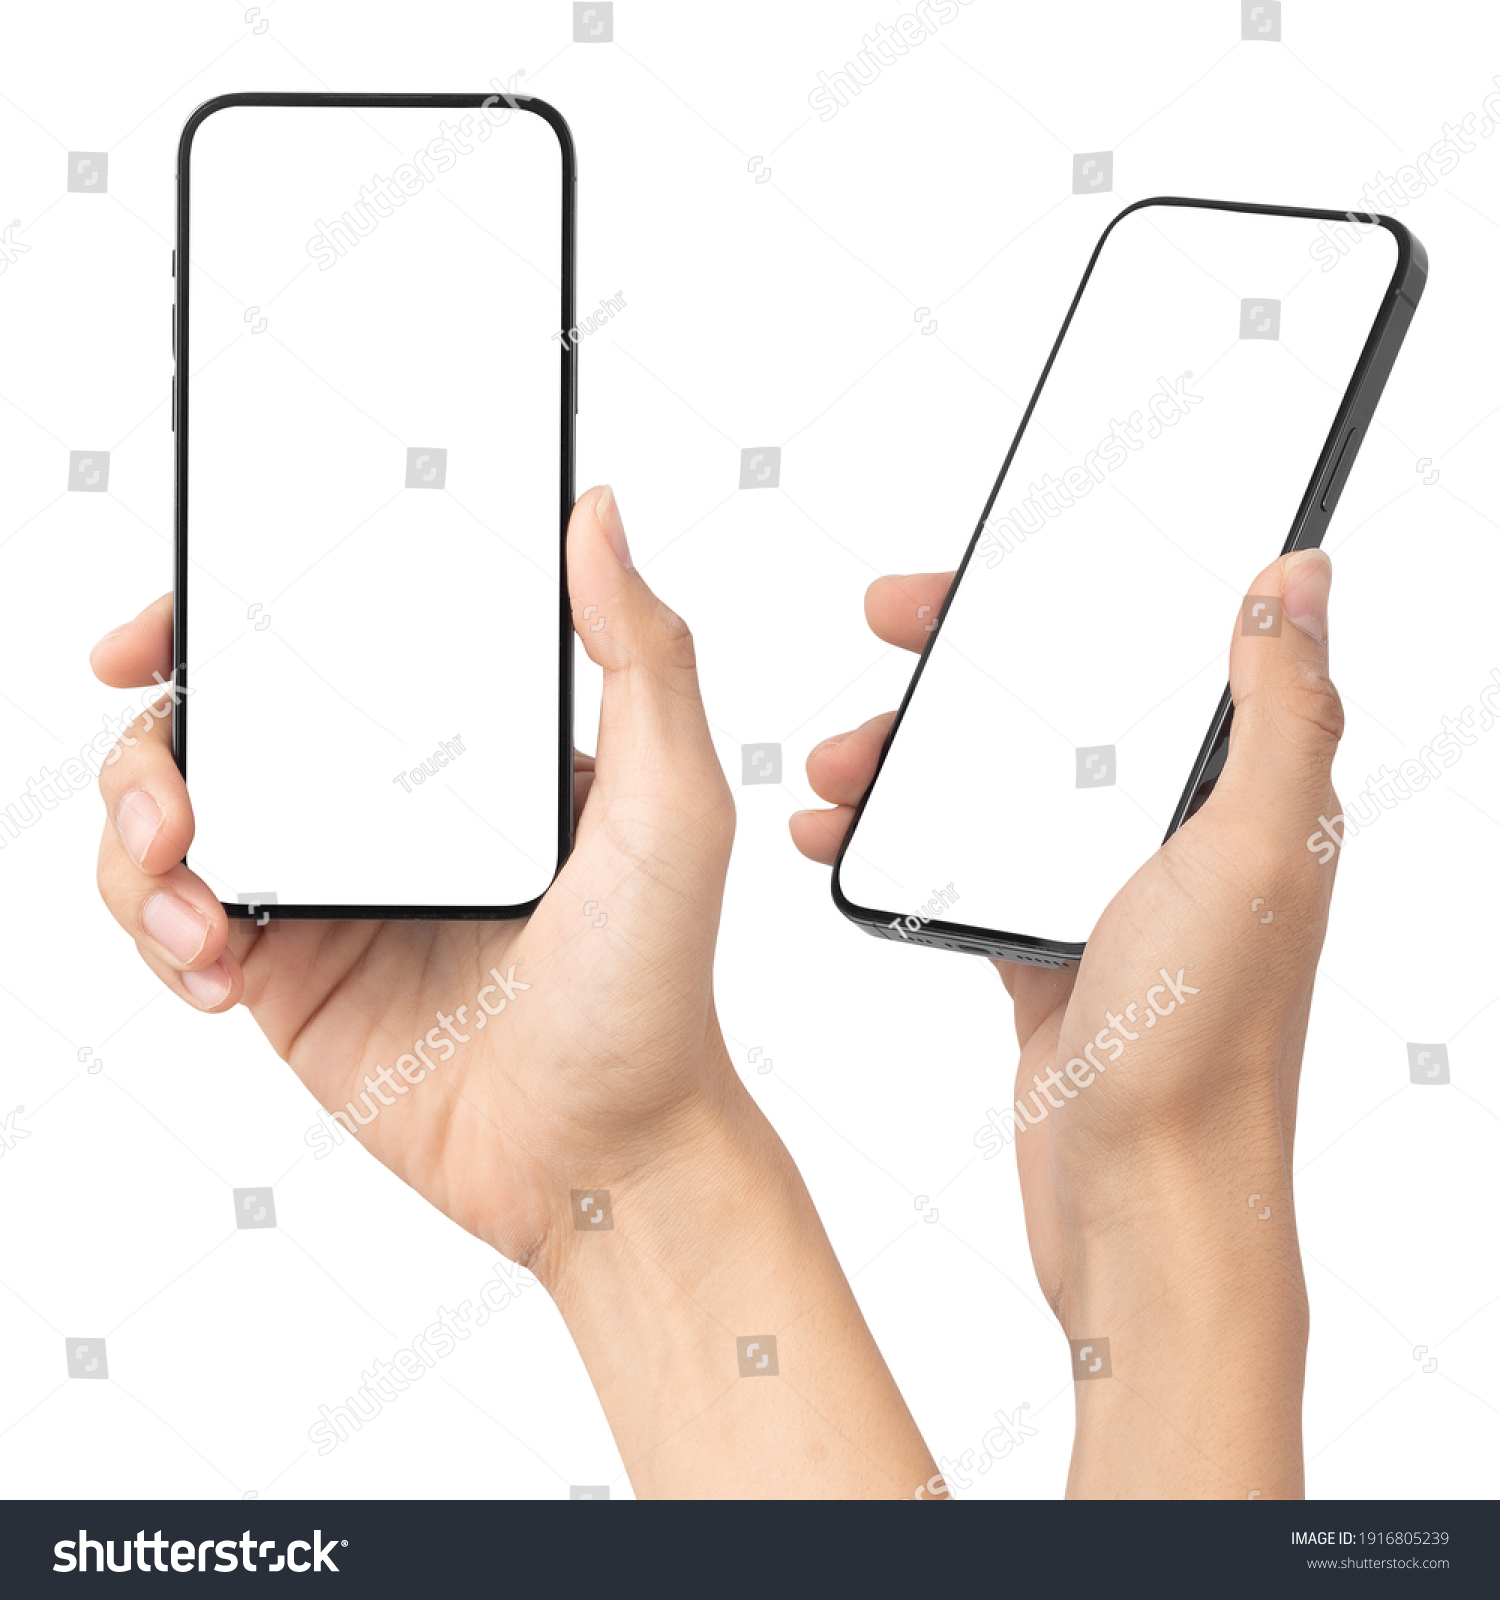 Set of man hand holding the black smartphone with blank screen isolated on white background with clipping path, Can use mock-up for your application or website design project. #1916805239